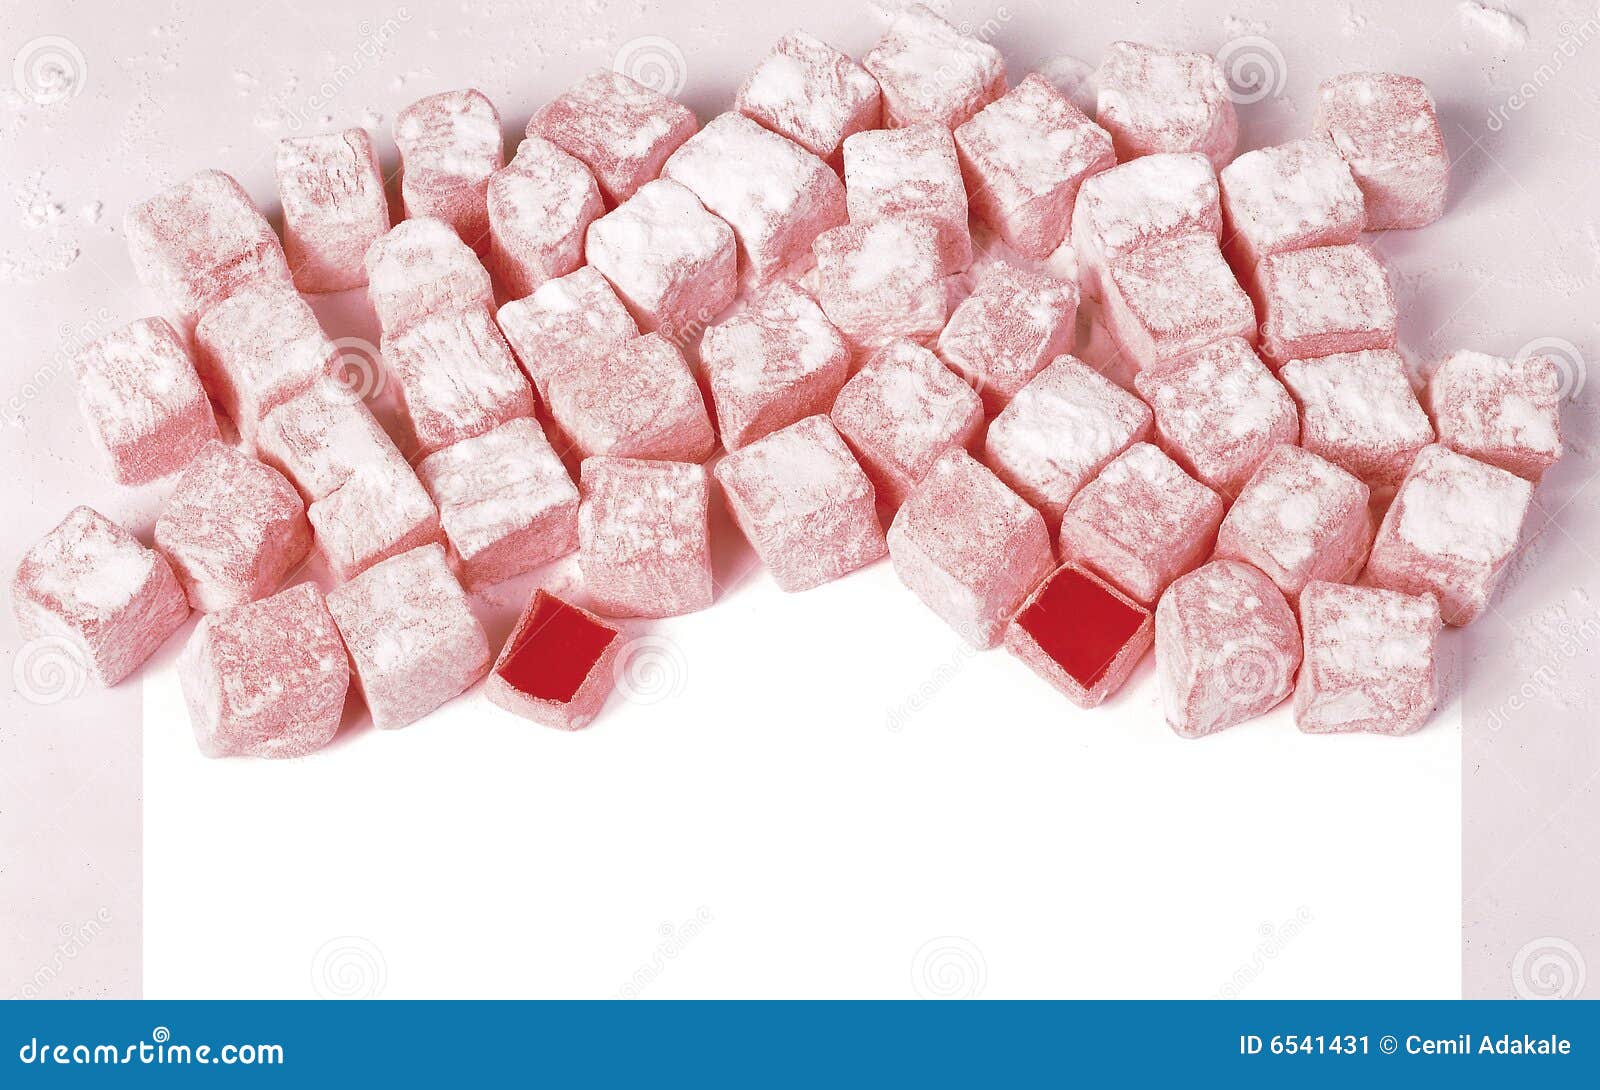 red turkish delight